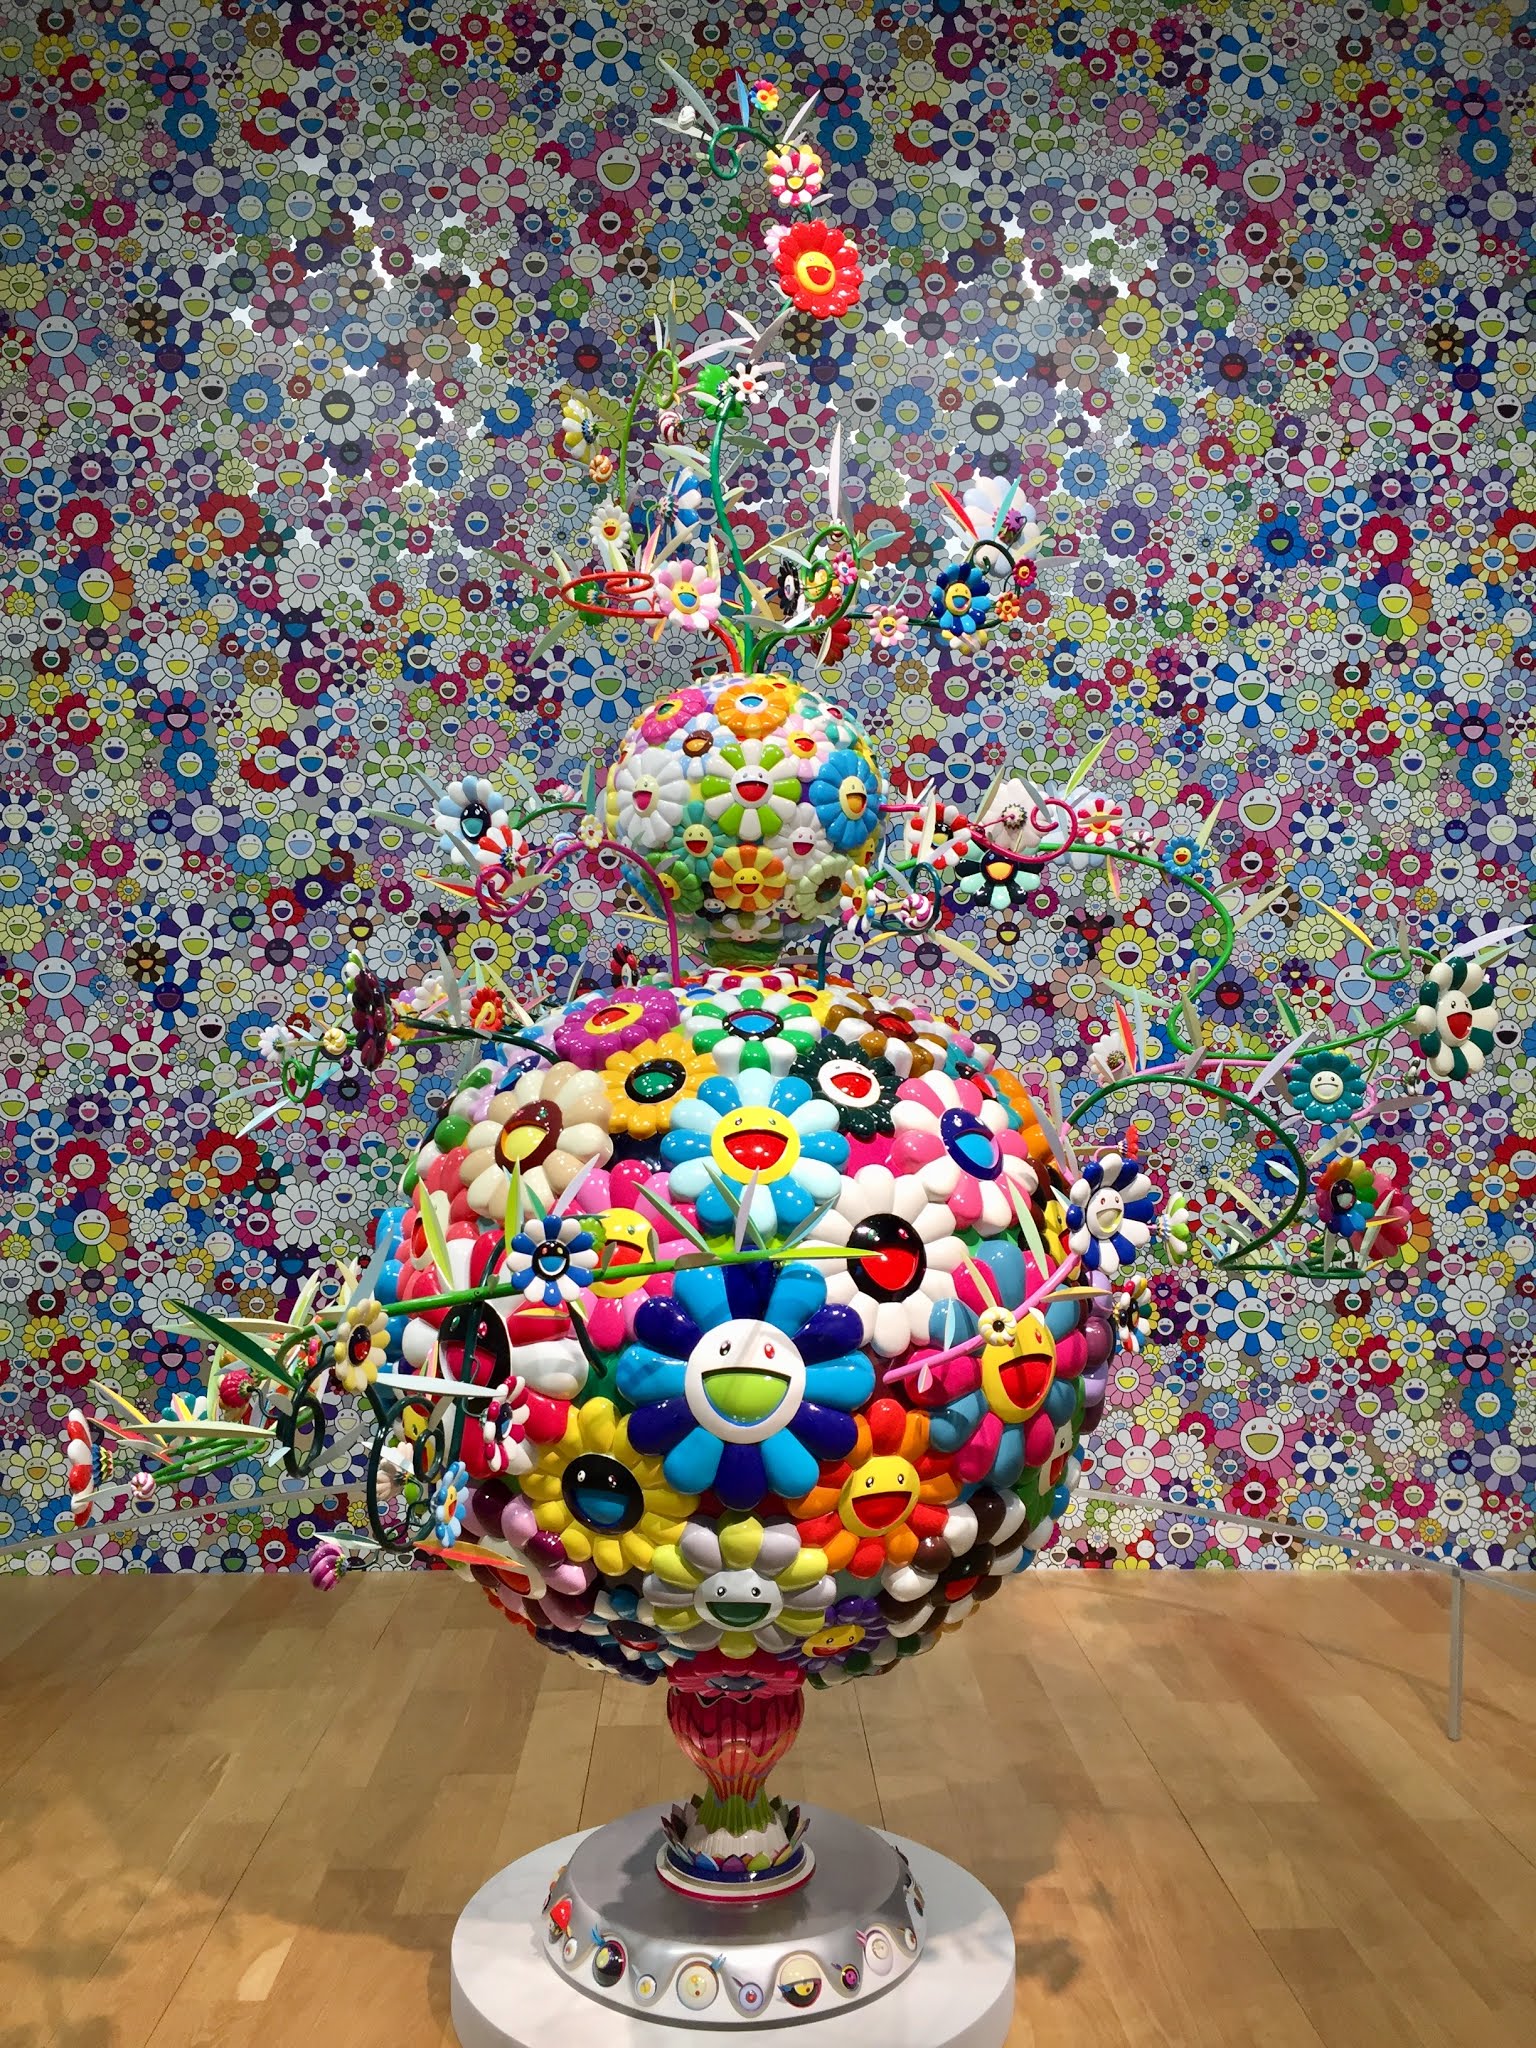 Takashi Murakami: The Octopus Eats Its Own Leg exhibit at the Museum of Modern Art in Fort Worth, Texas